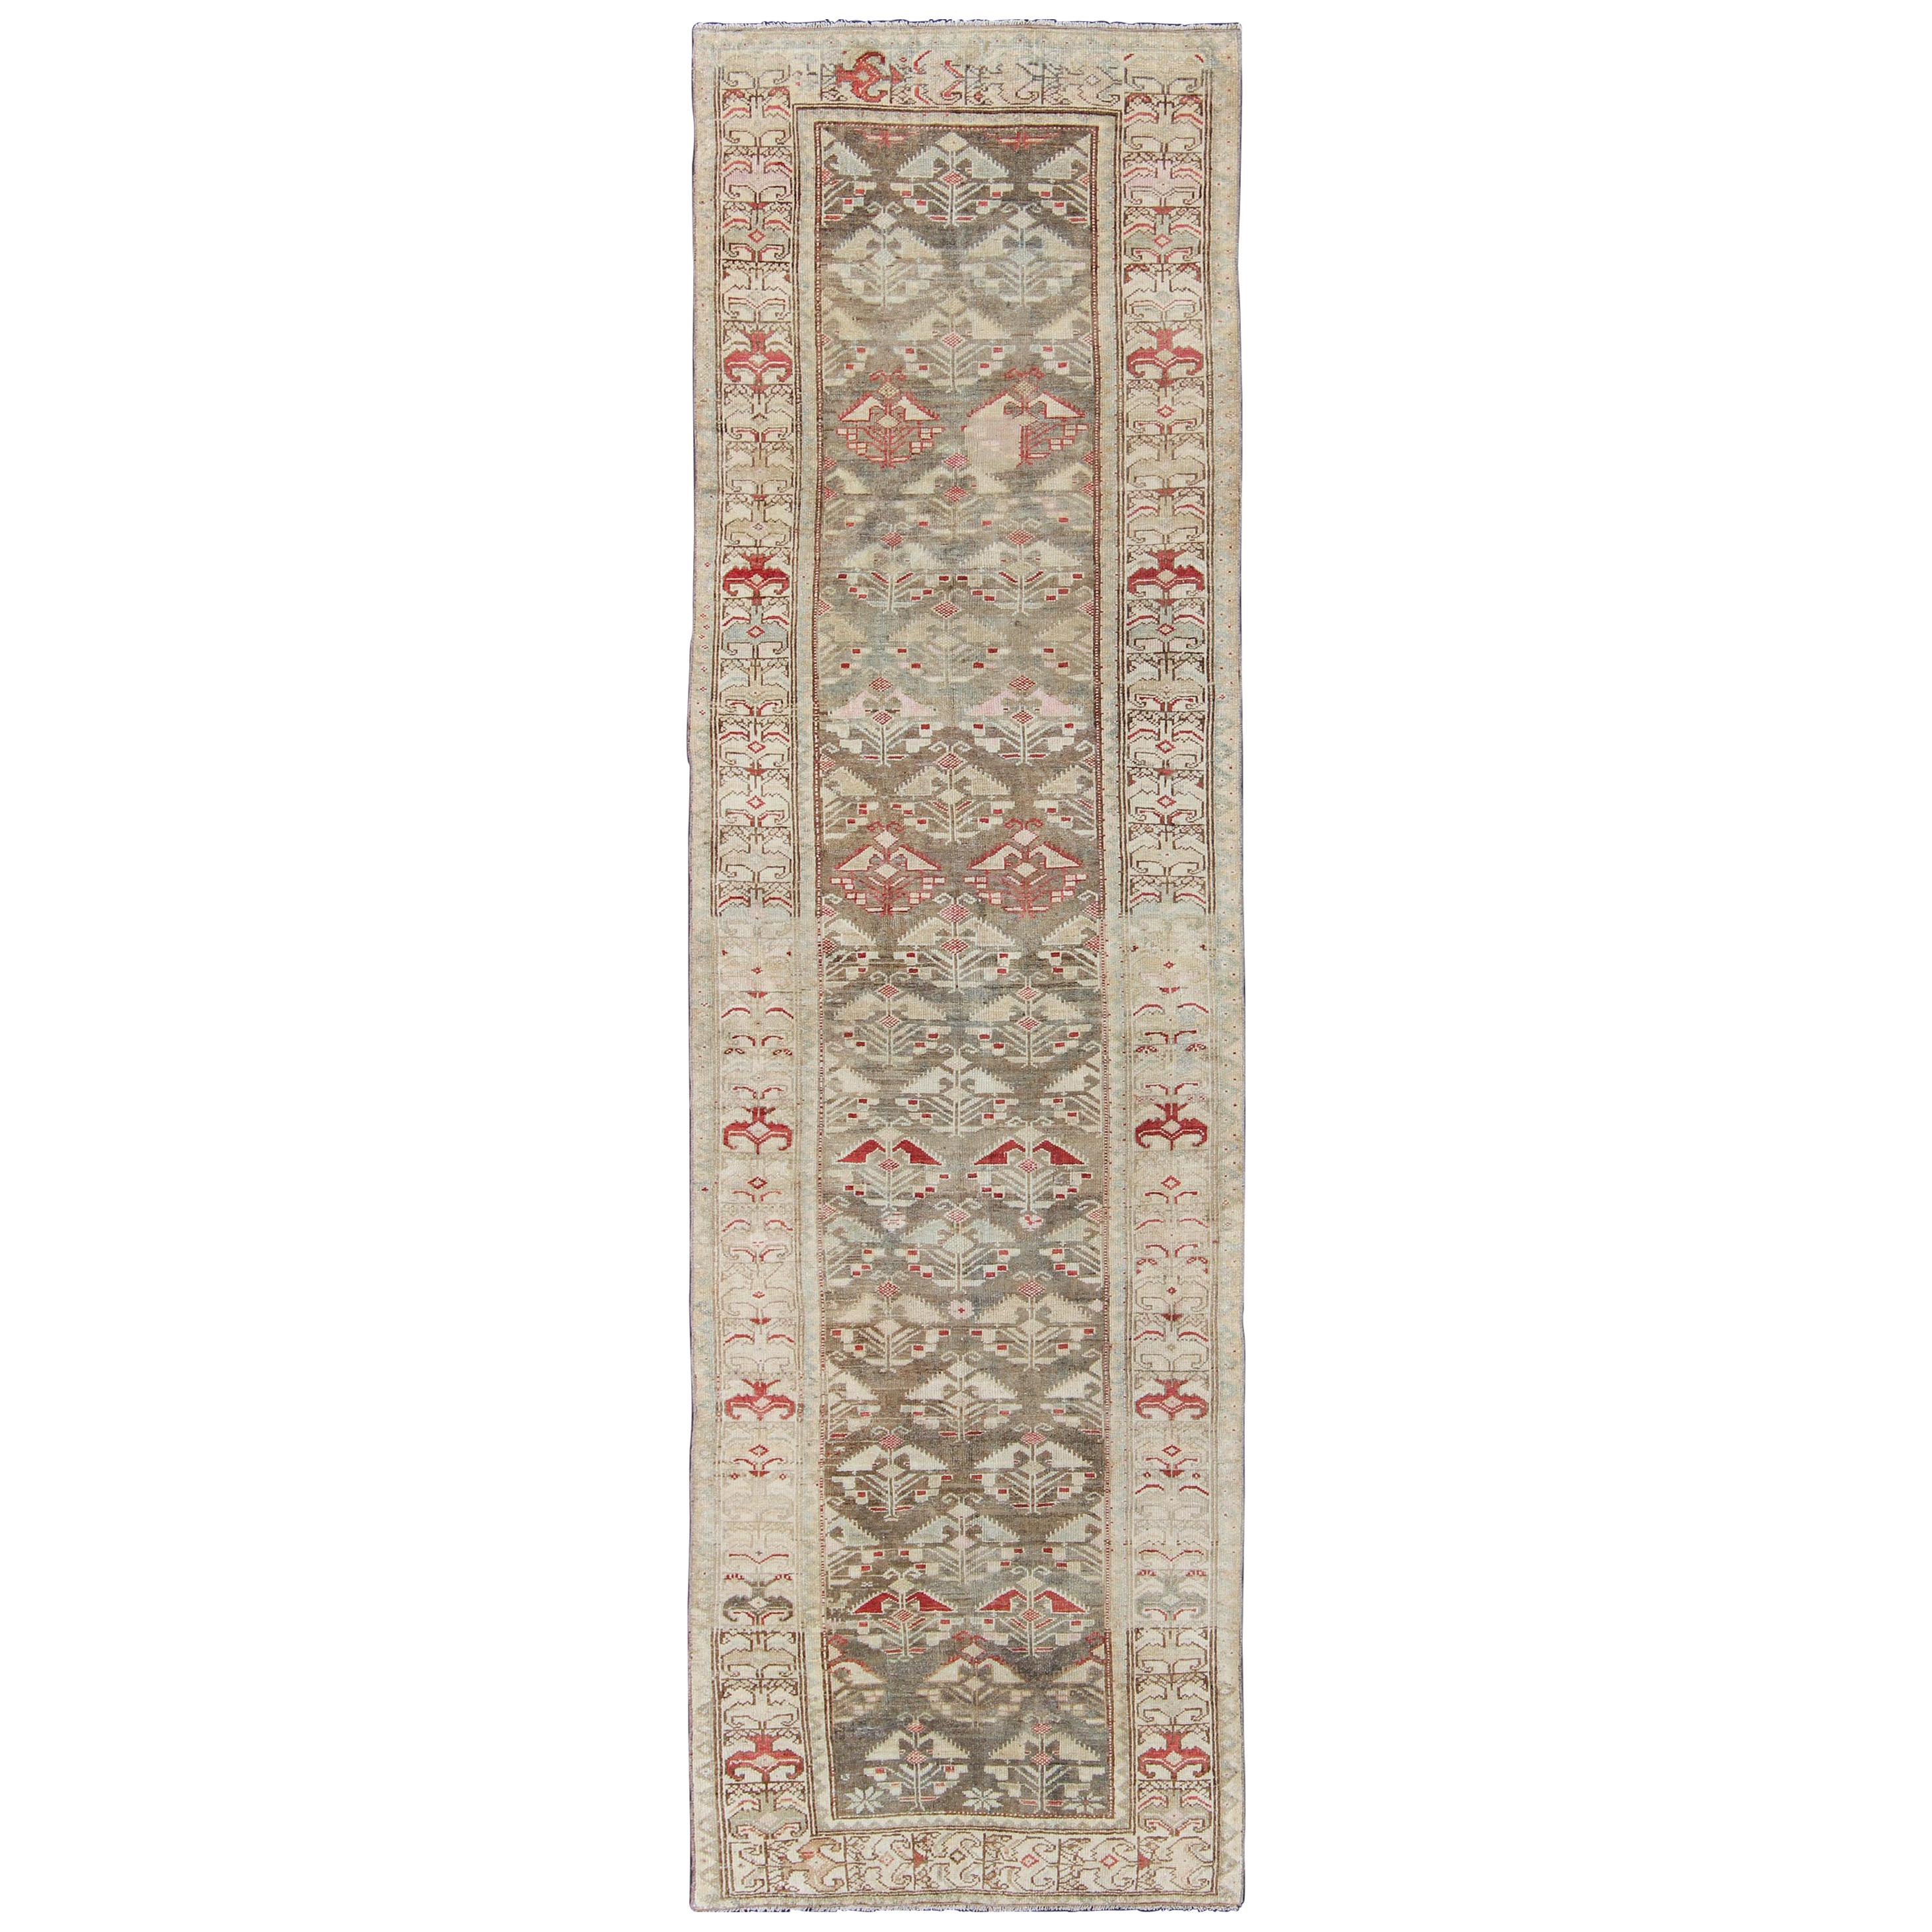 Antique Persian Kurdish Runner with Repeating Geometric in Gray Green, Neutrals